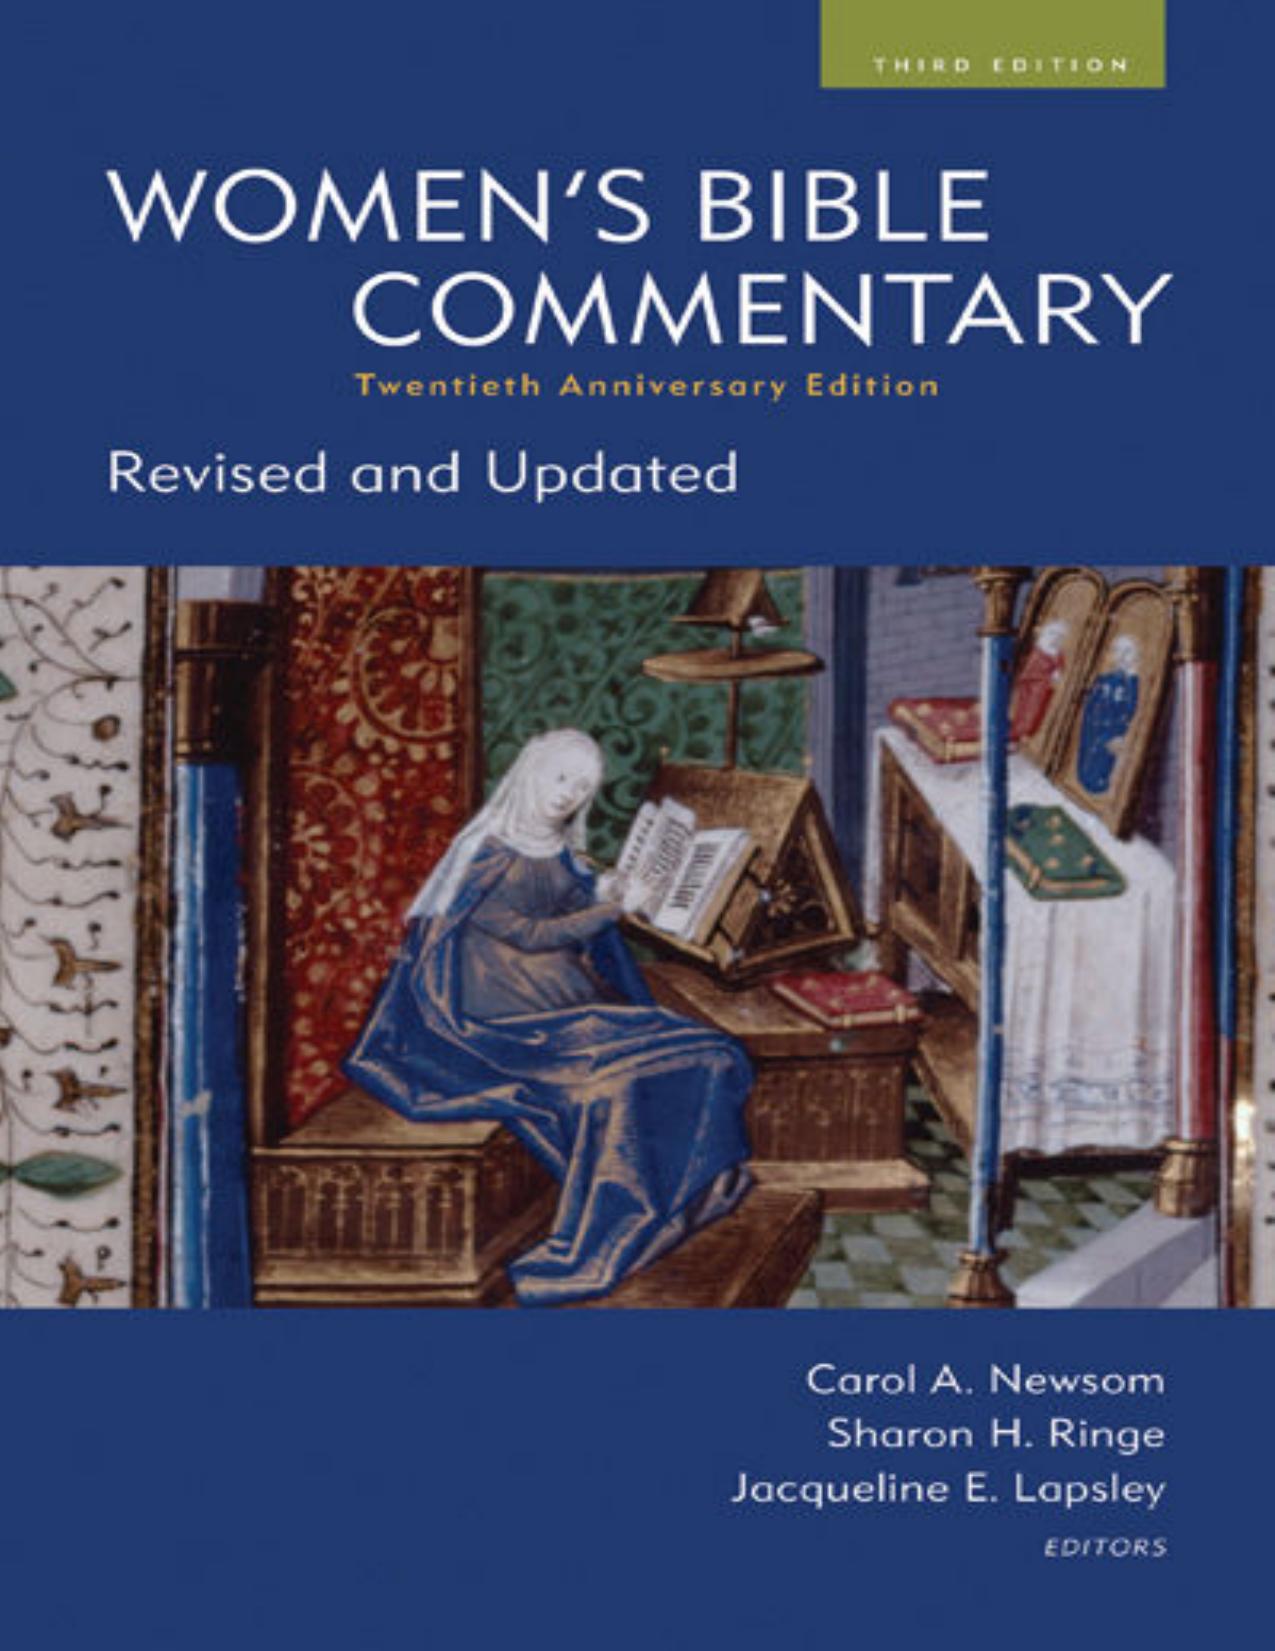 (eBook PDF)Women＆＃39;s Bible Commentary, Third Edition: Revised and Updated by Carol A. Newsom,Sharon H. Ringe